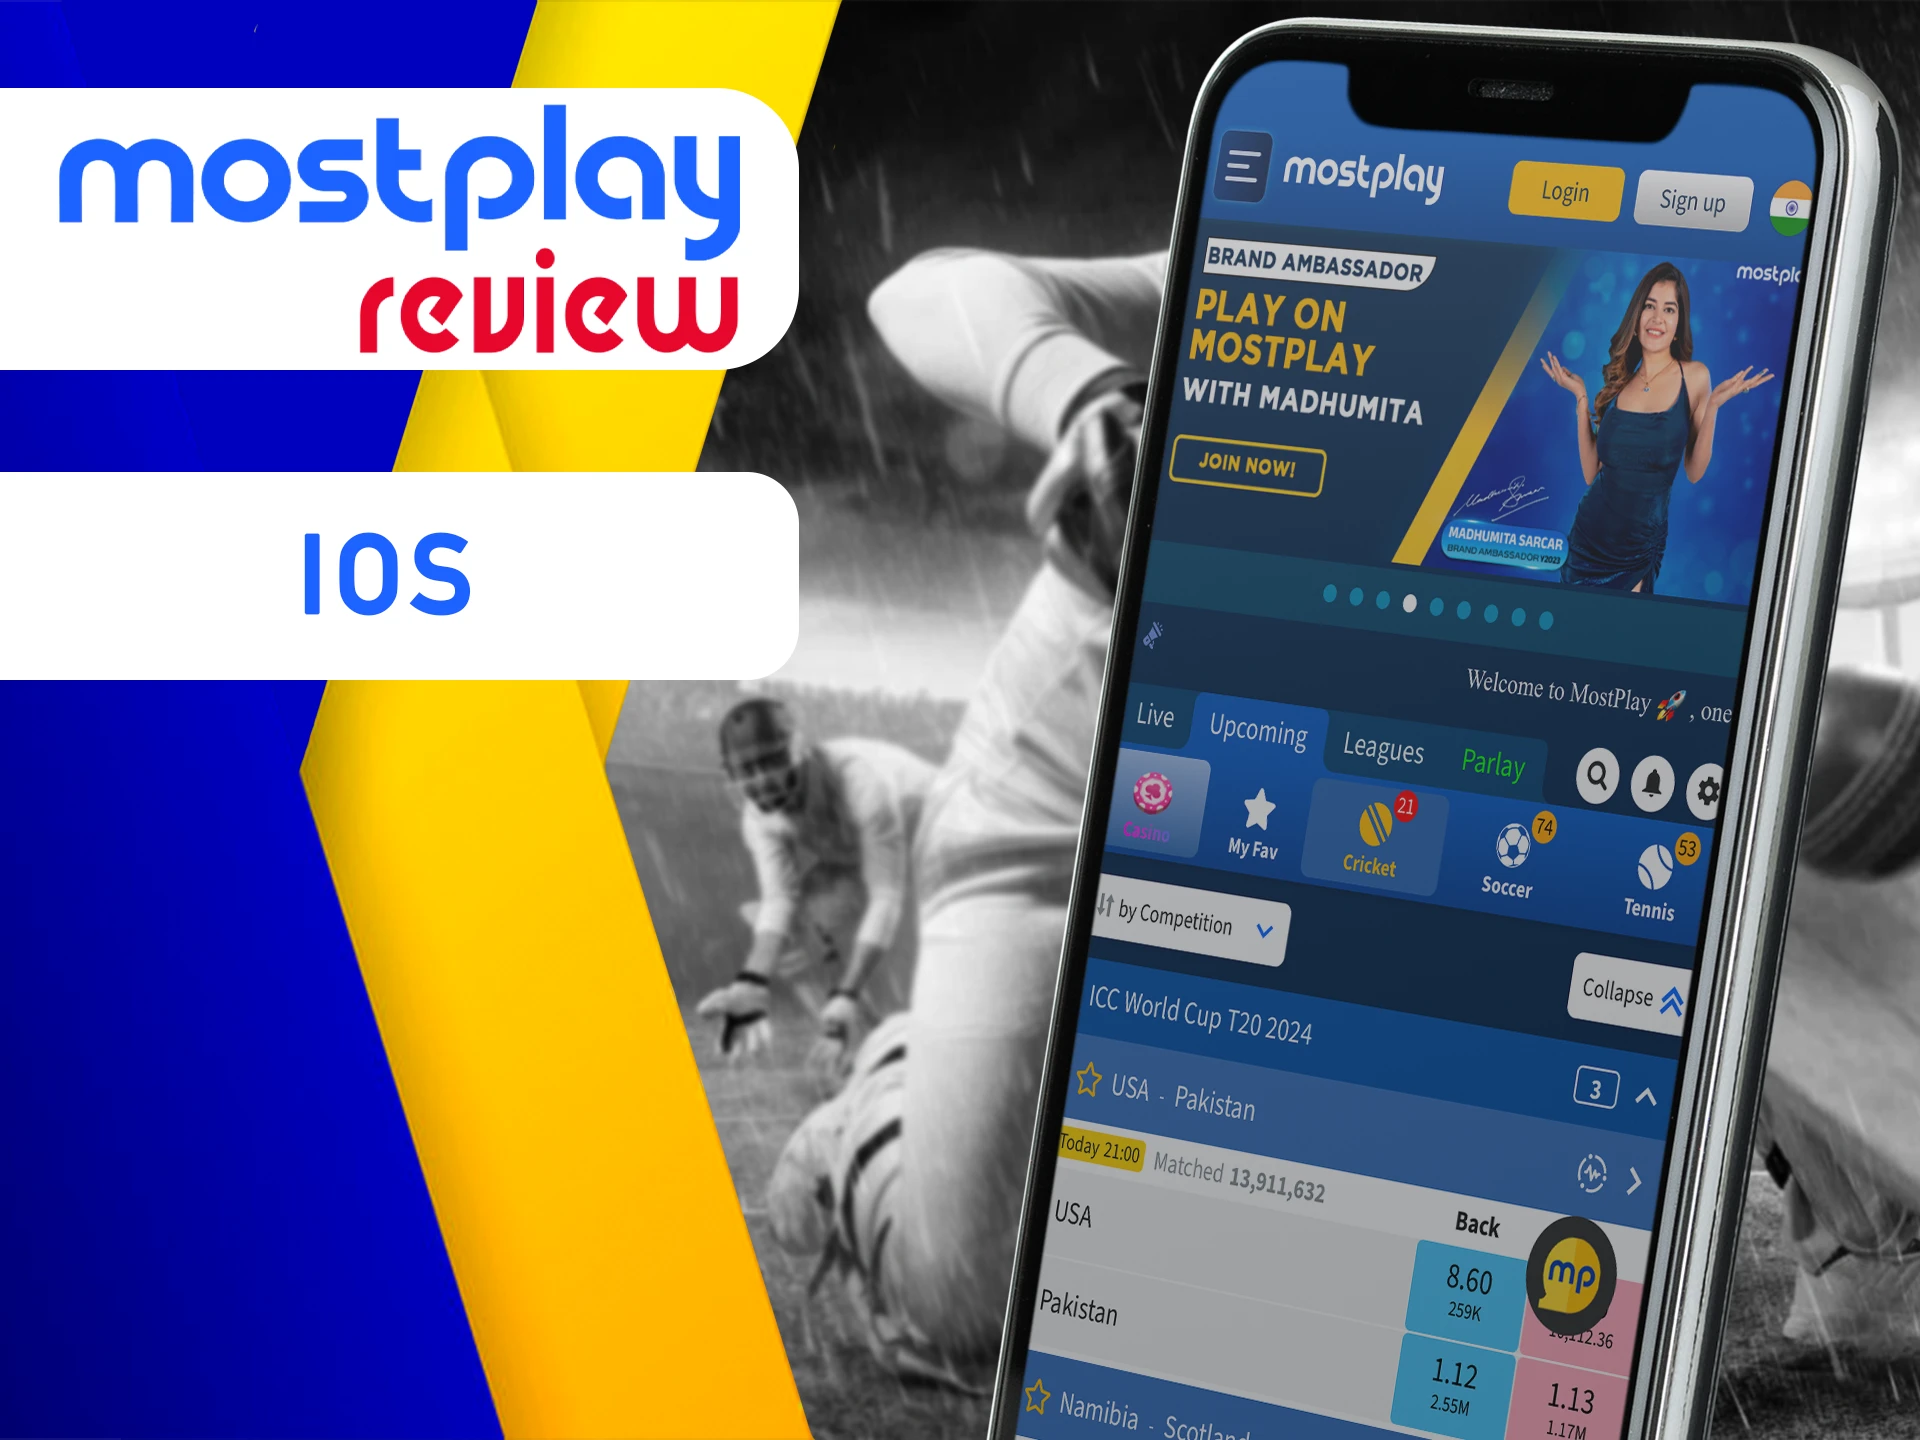 Install the Mostplay iOS app on all of your Apple devices.